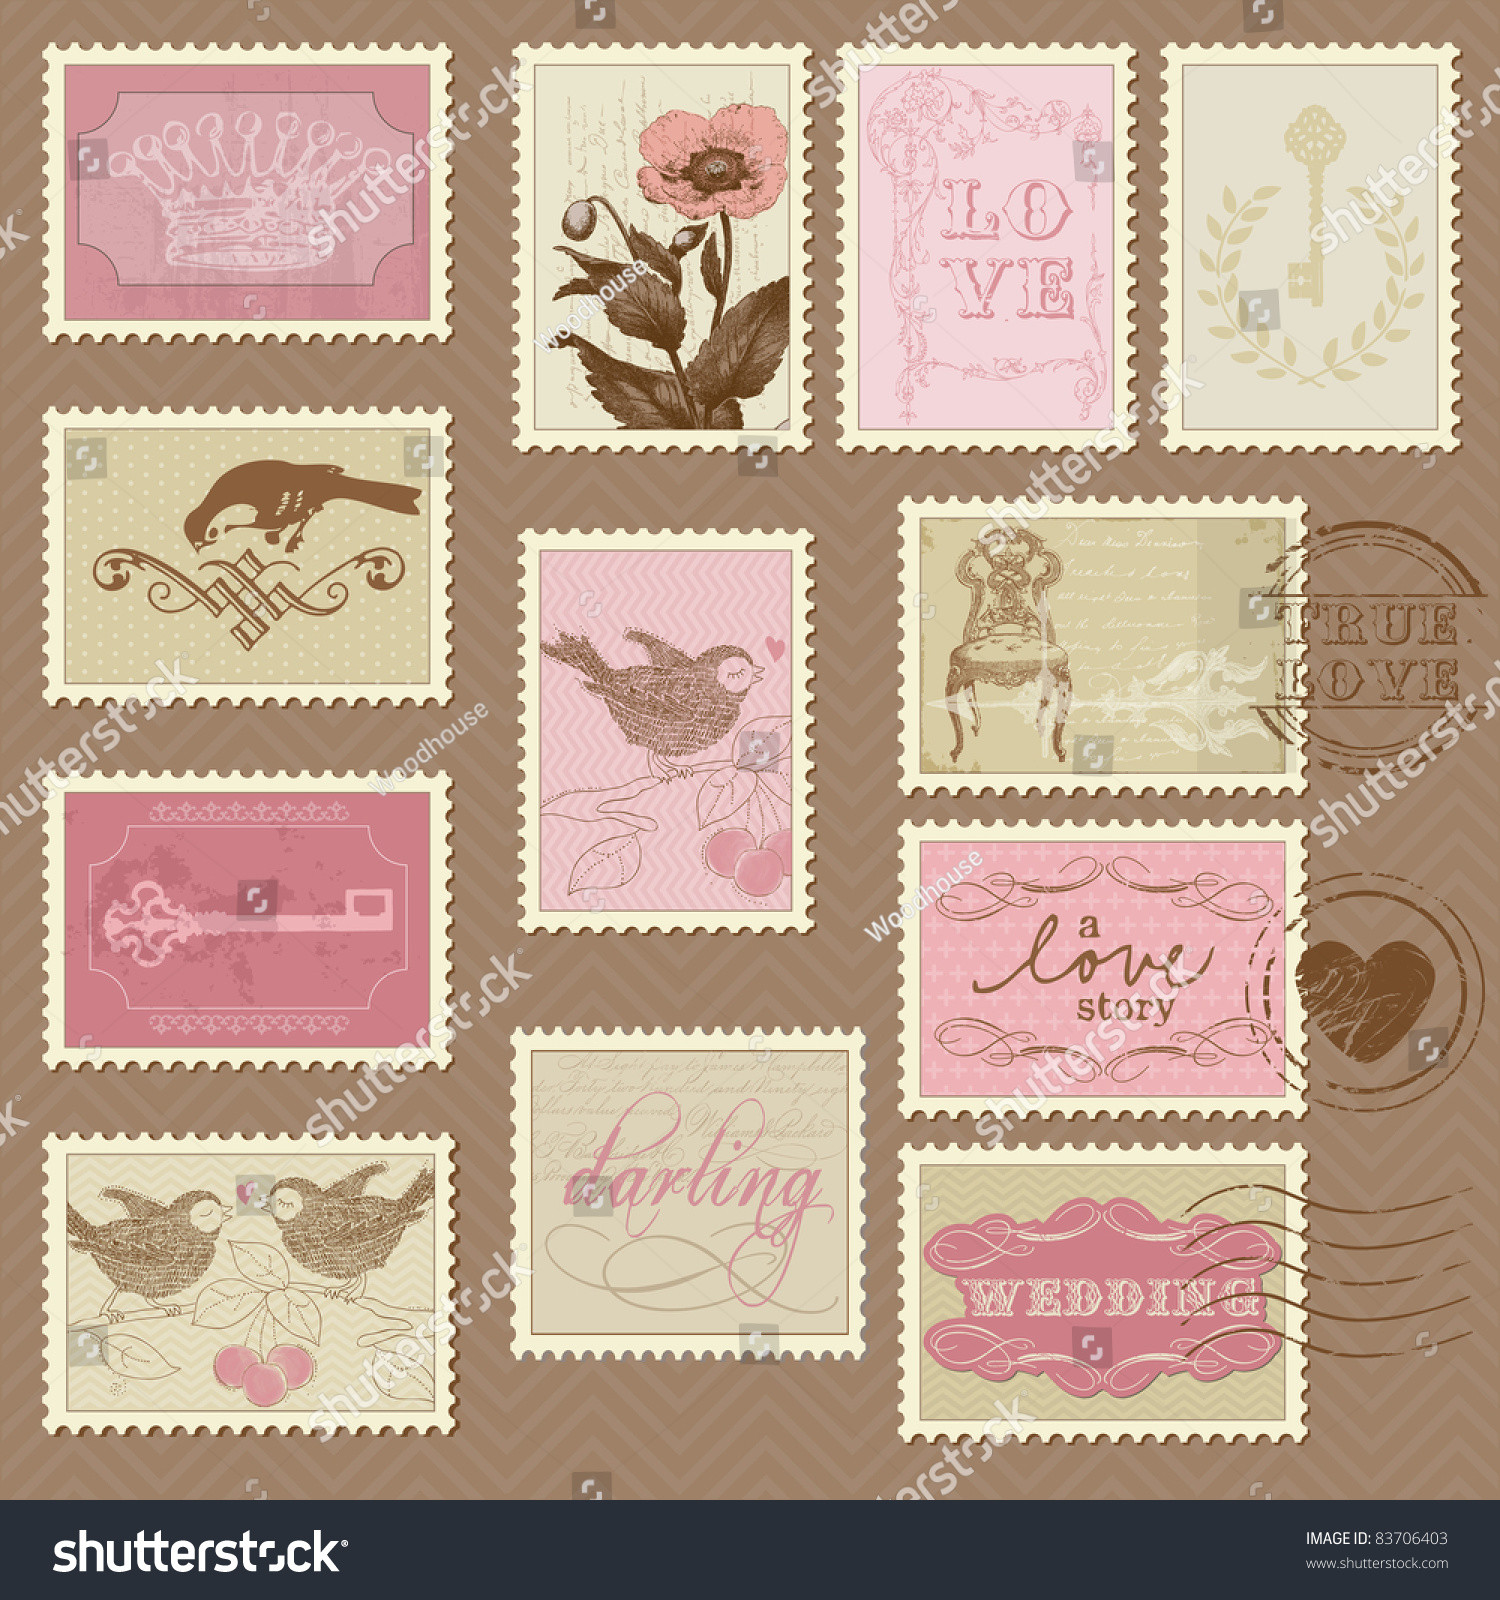 Postage Stamps For Wedding Invitations
 Retro Postage Stamps Wedding Design Invitation Stock